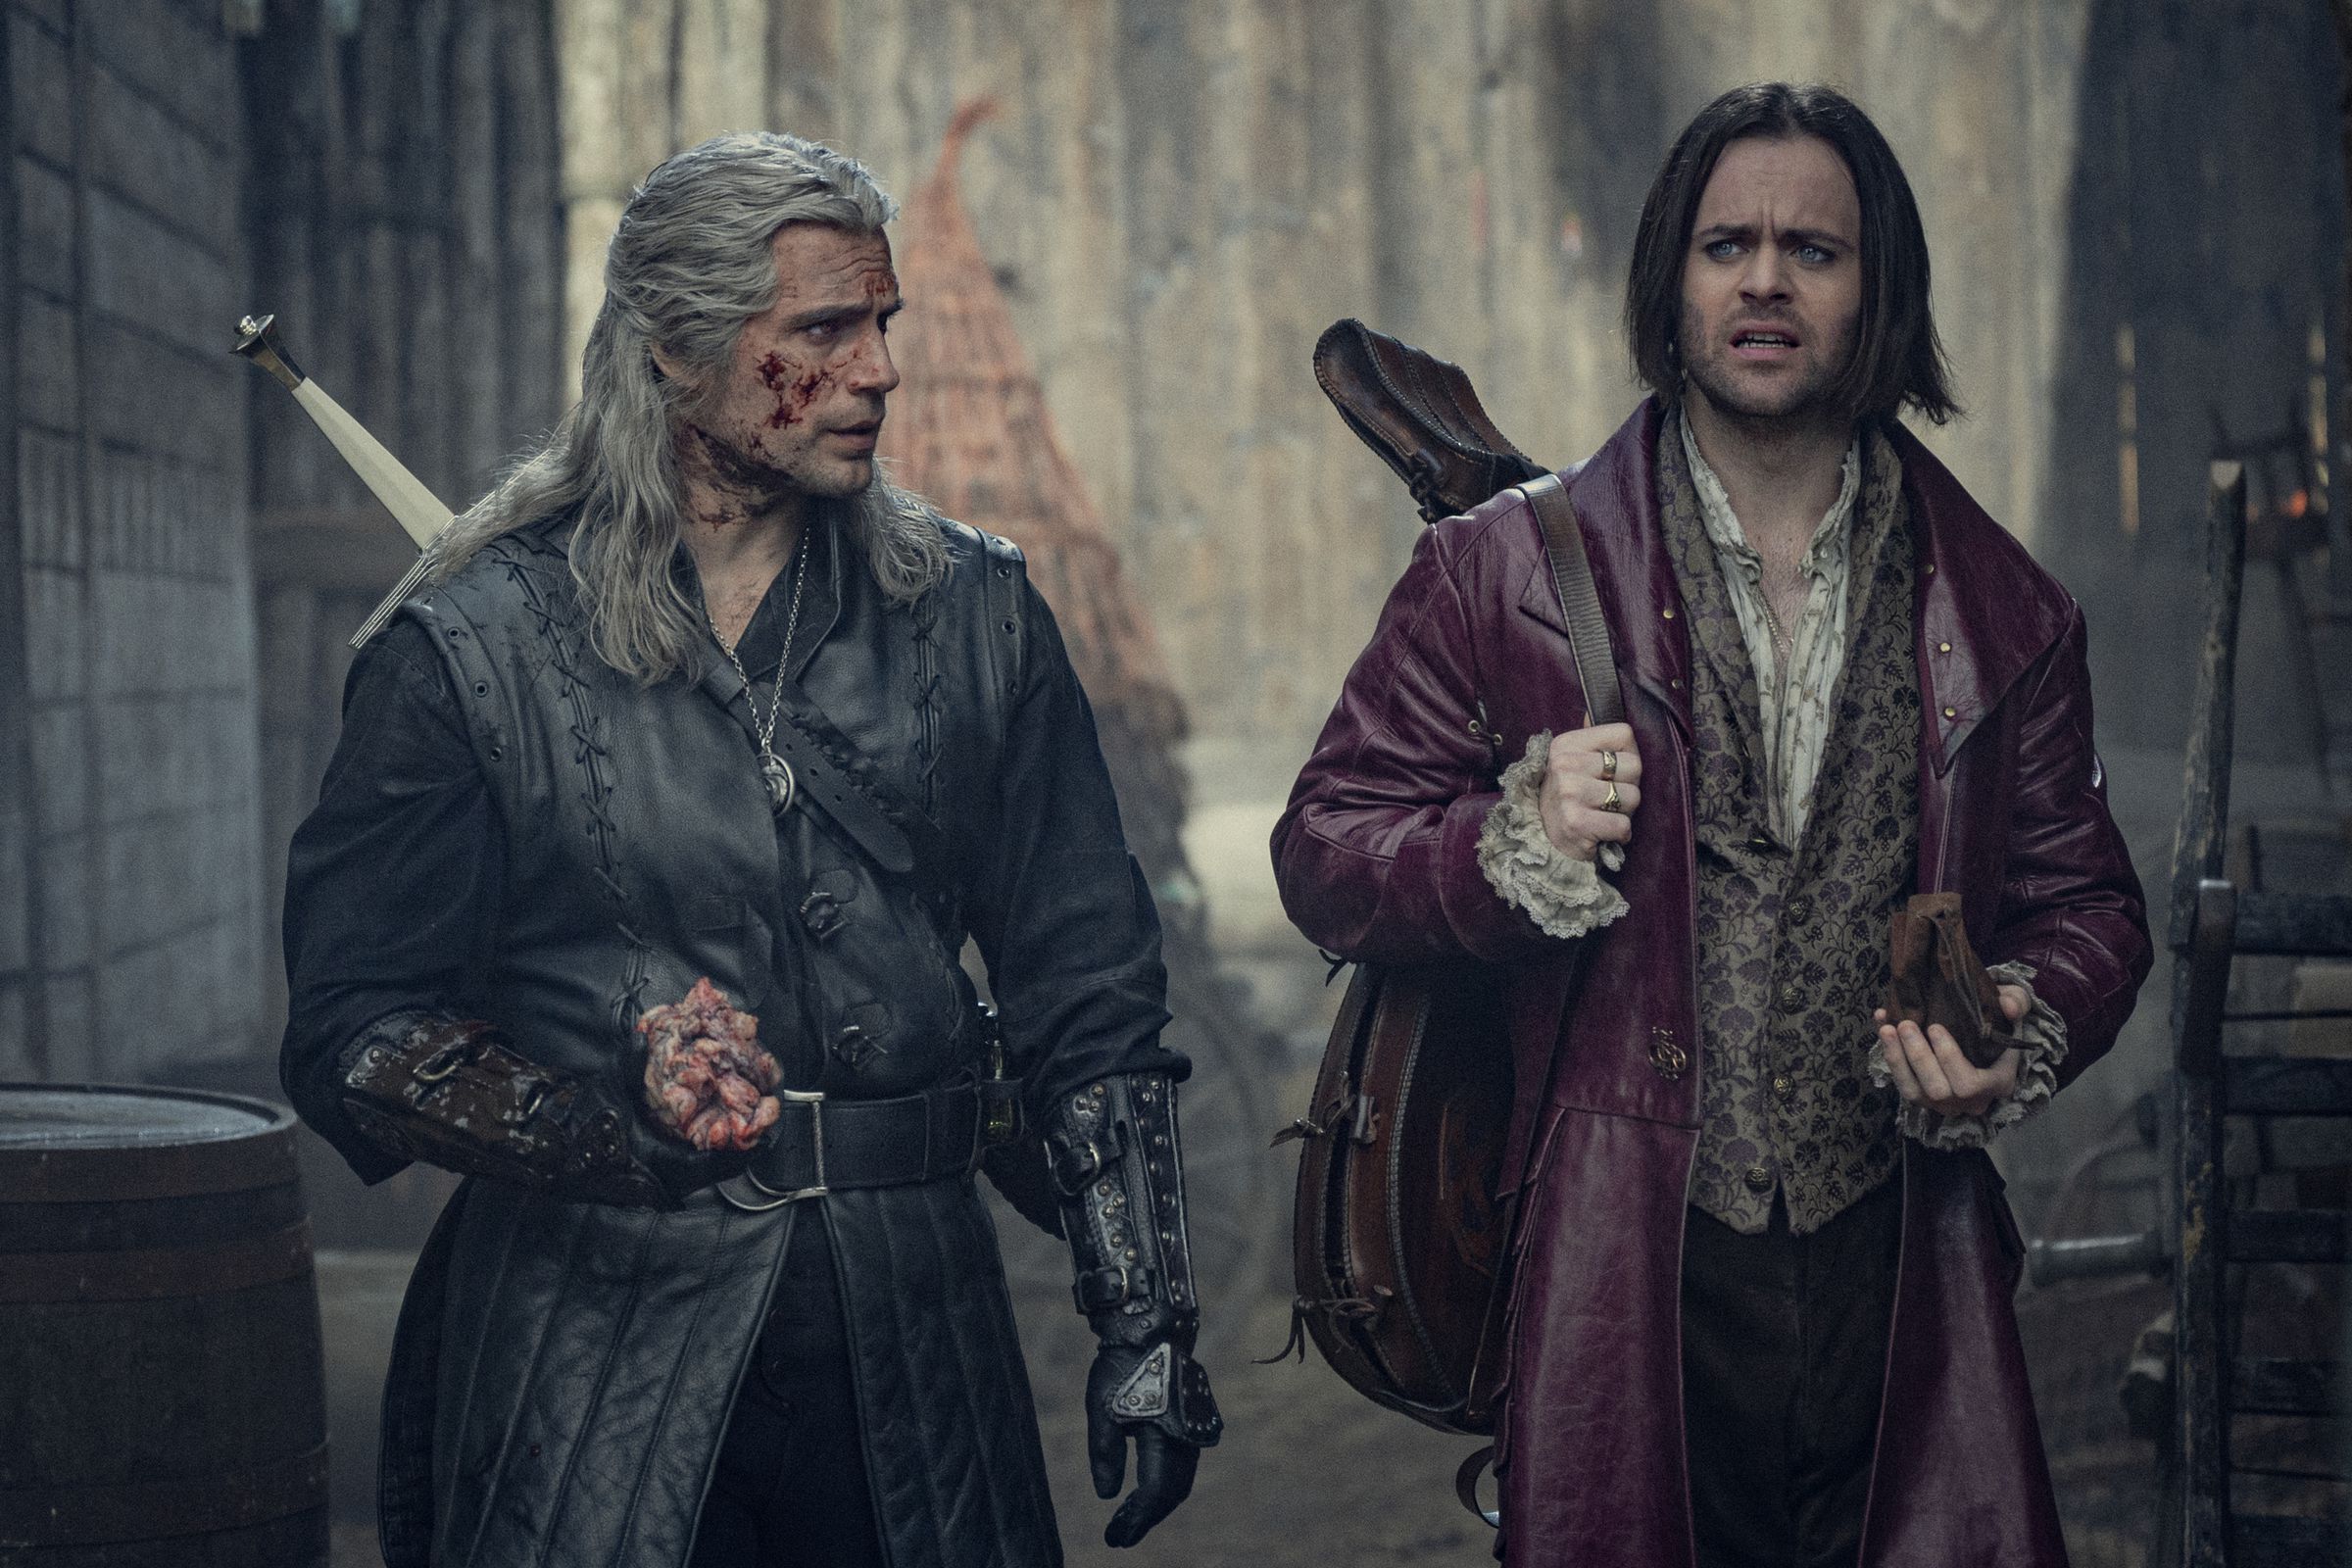 A still photo from The Witcher series on Netflix.